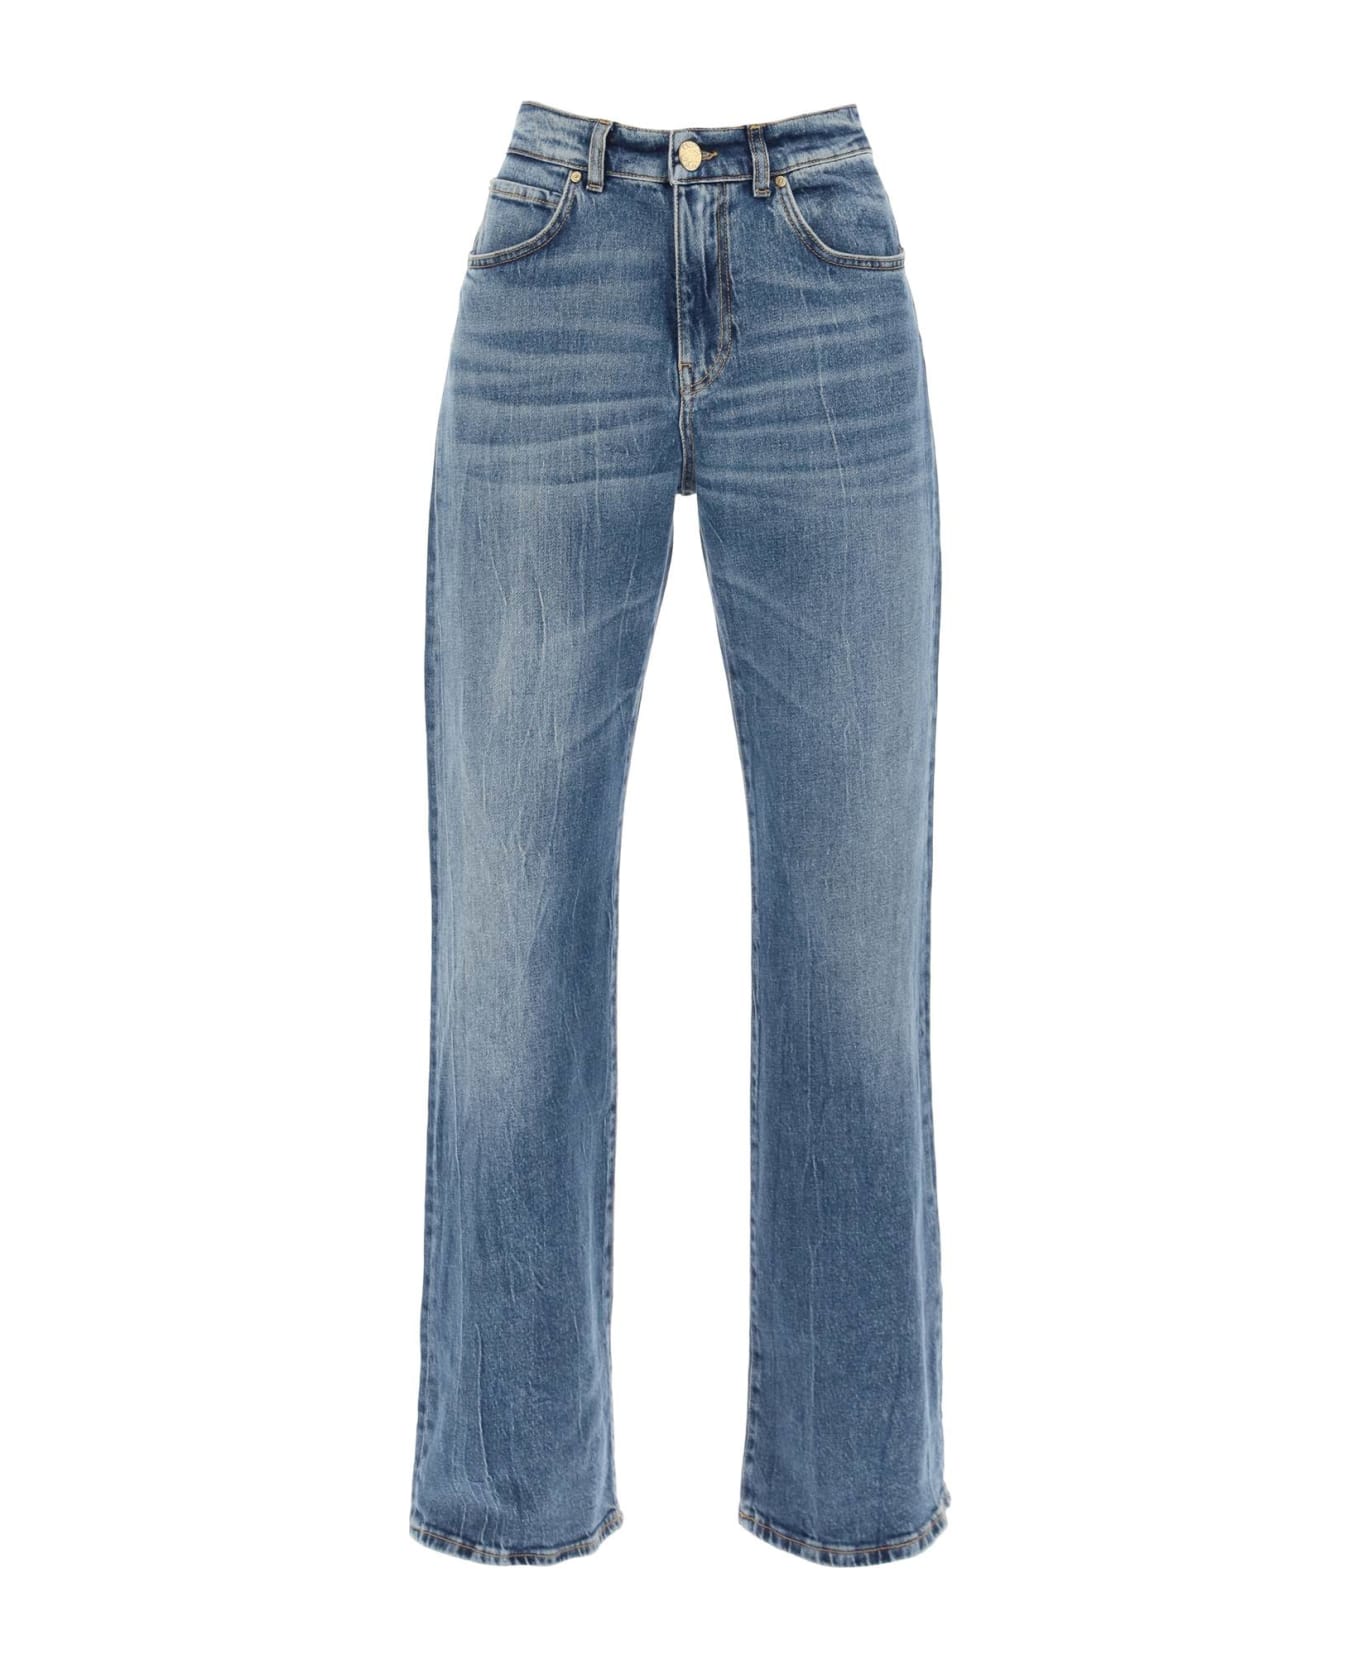 Pinko Wanda Loose Jeans With Wide Leg - VINTAGE SCURO (Blue)